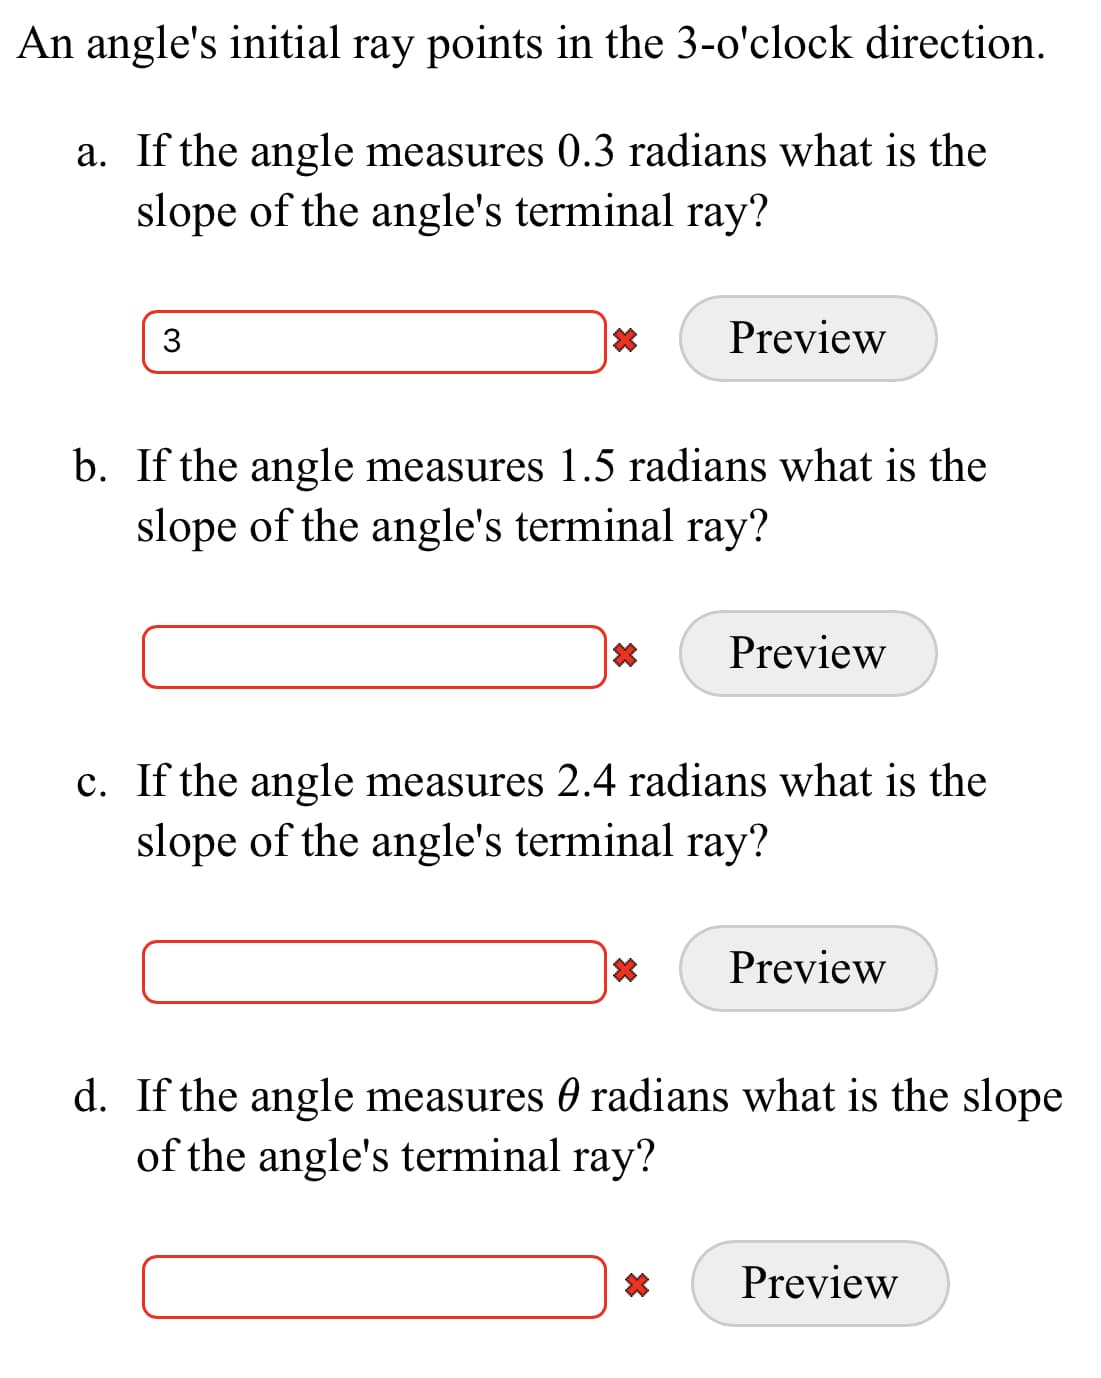 An angle's initial ray points in the 3-o'clock direction.
a. If the angle measures 0.3 radians what is the
slope of the angle's terminal ray?
Preview
b. If the angle measures 1.5 radians what is the
slope of the angle's terminal ray?
Preview
c. If the angle measures 2.4 radians what is the
slope of the angle's terminal ray?
Preview
d. If the angle measures 0 radians what is the slope
of the angle's terminal ray?
Preview
